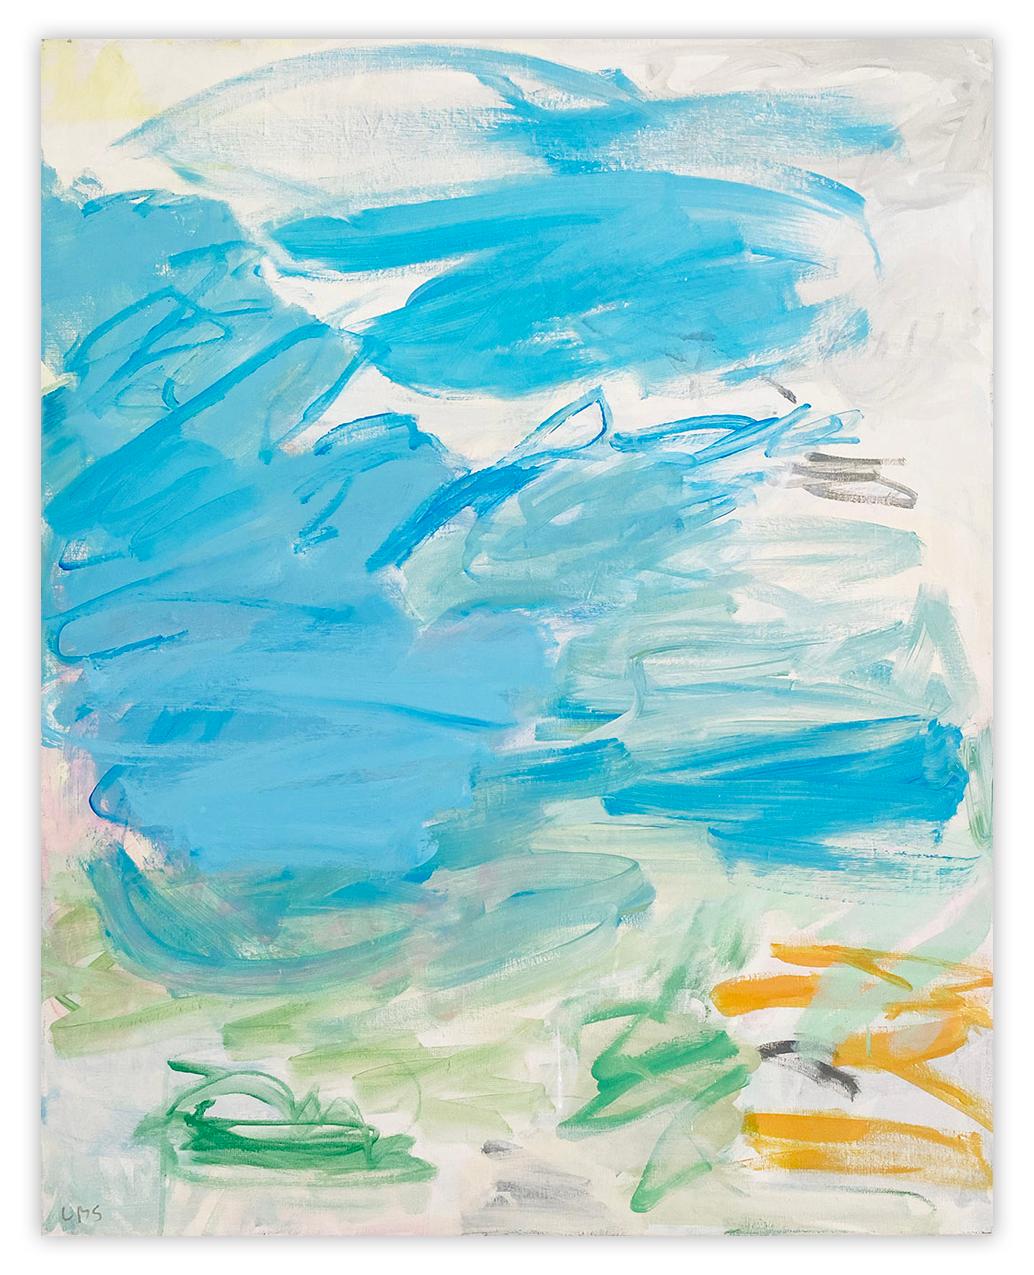 Untitled (summer breeze) (Abstract painting)

Acrylic on linen - Unframed

"This artwork is exclusive to IdeelArt.

Basterra's abstract expressionist approach to painting is a response to her environment, nature, and gestural movement. A text-based